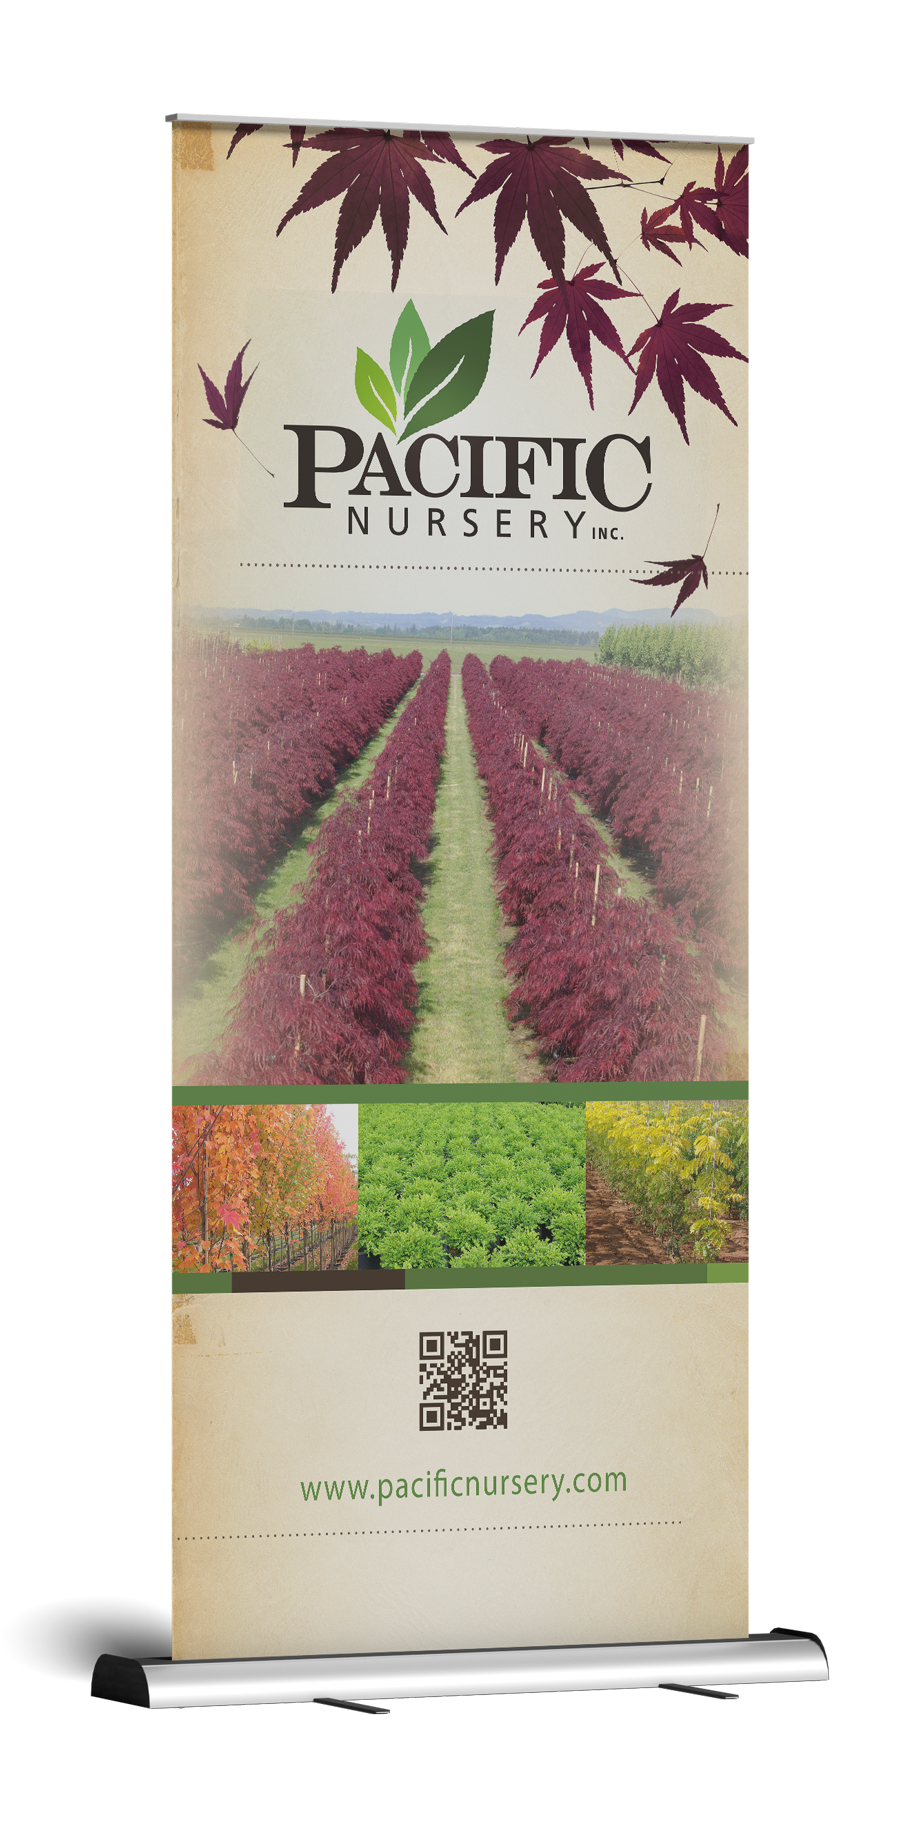 Pacific Nursery Front - Pop Up Banner Design & Print Production